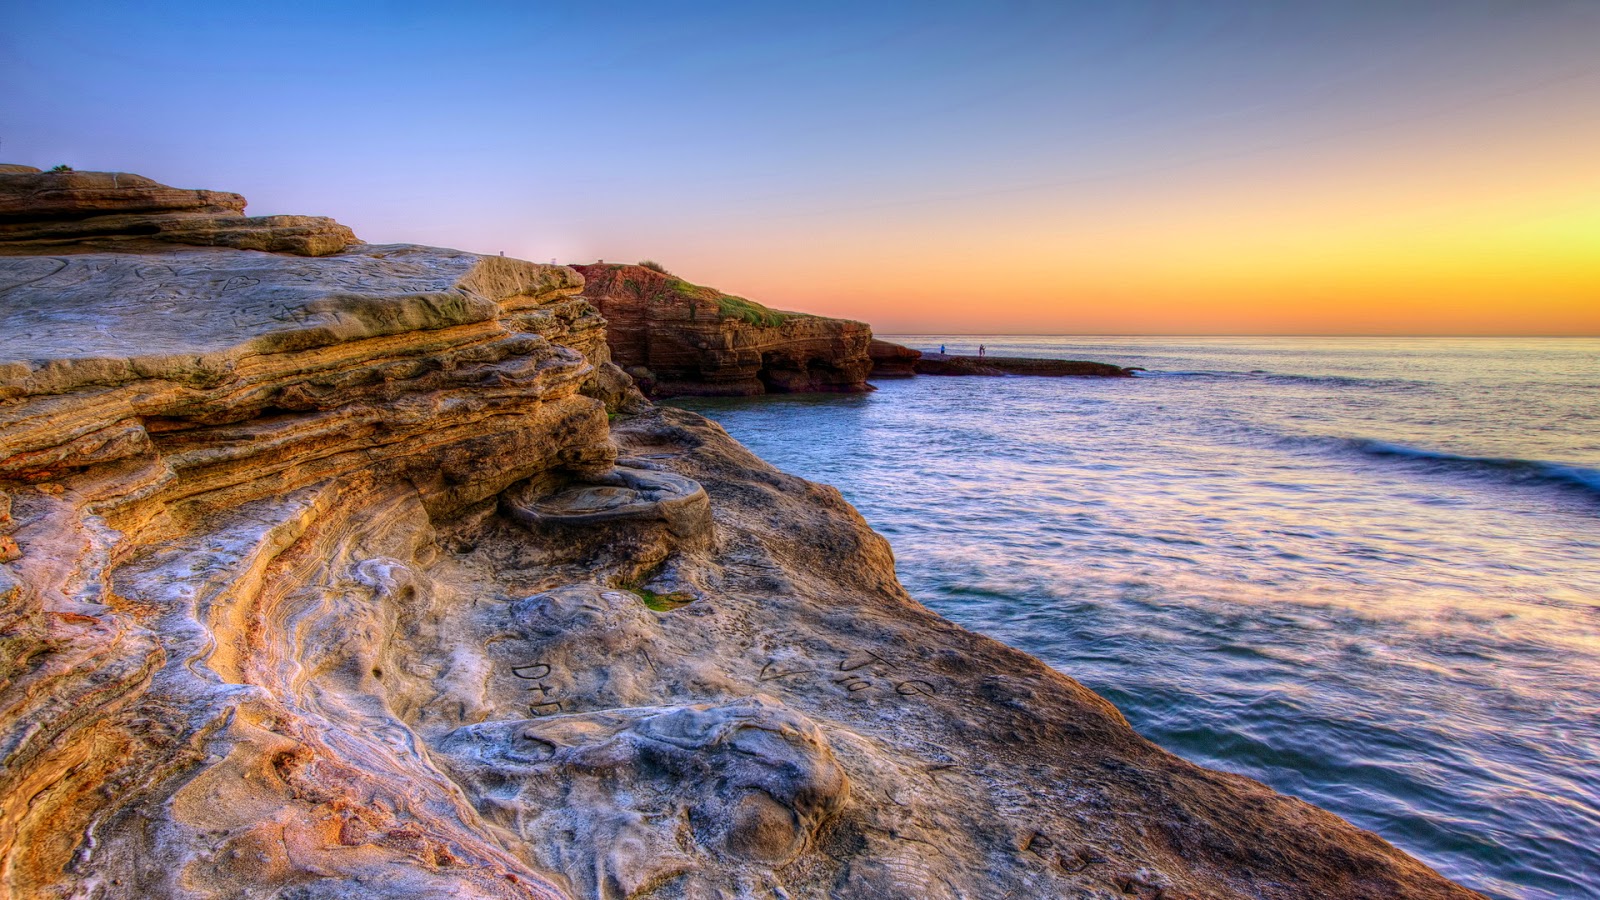  San Diego this is beautiful Rocky beach This wallpaper San Diego is